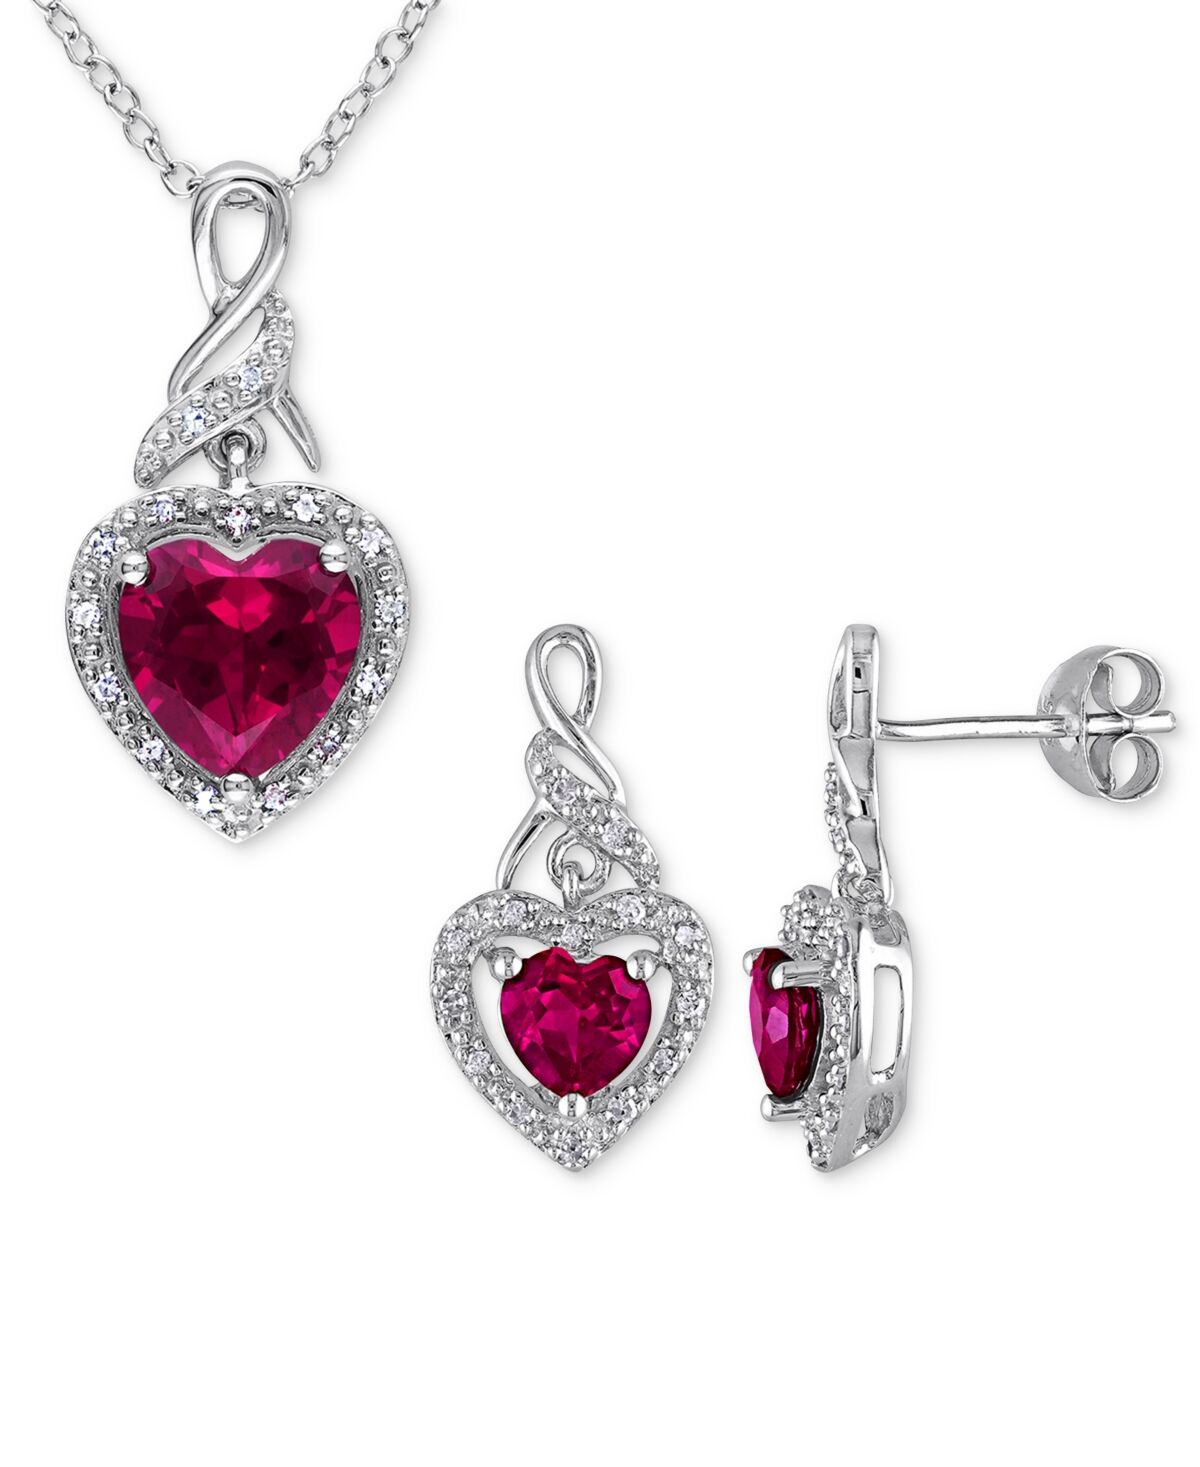 Macy's 2-Pc. Set Lab-Created Ruby (4 ct. t.w.) & Diamond (1/4 ct. t.w.) Heart Halo Pendant Necklace and Matching Drop Earrings in Sterling Silver - RUBY